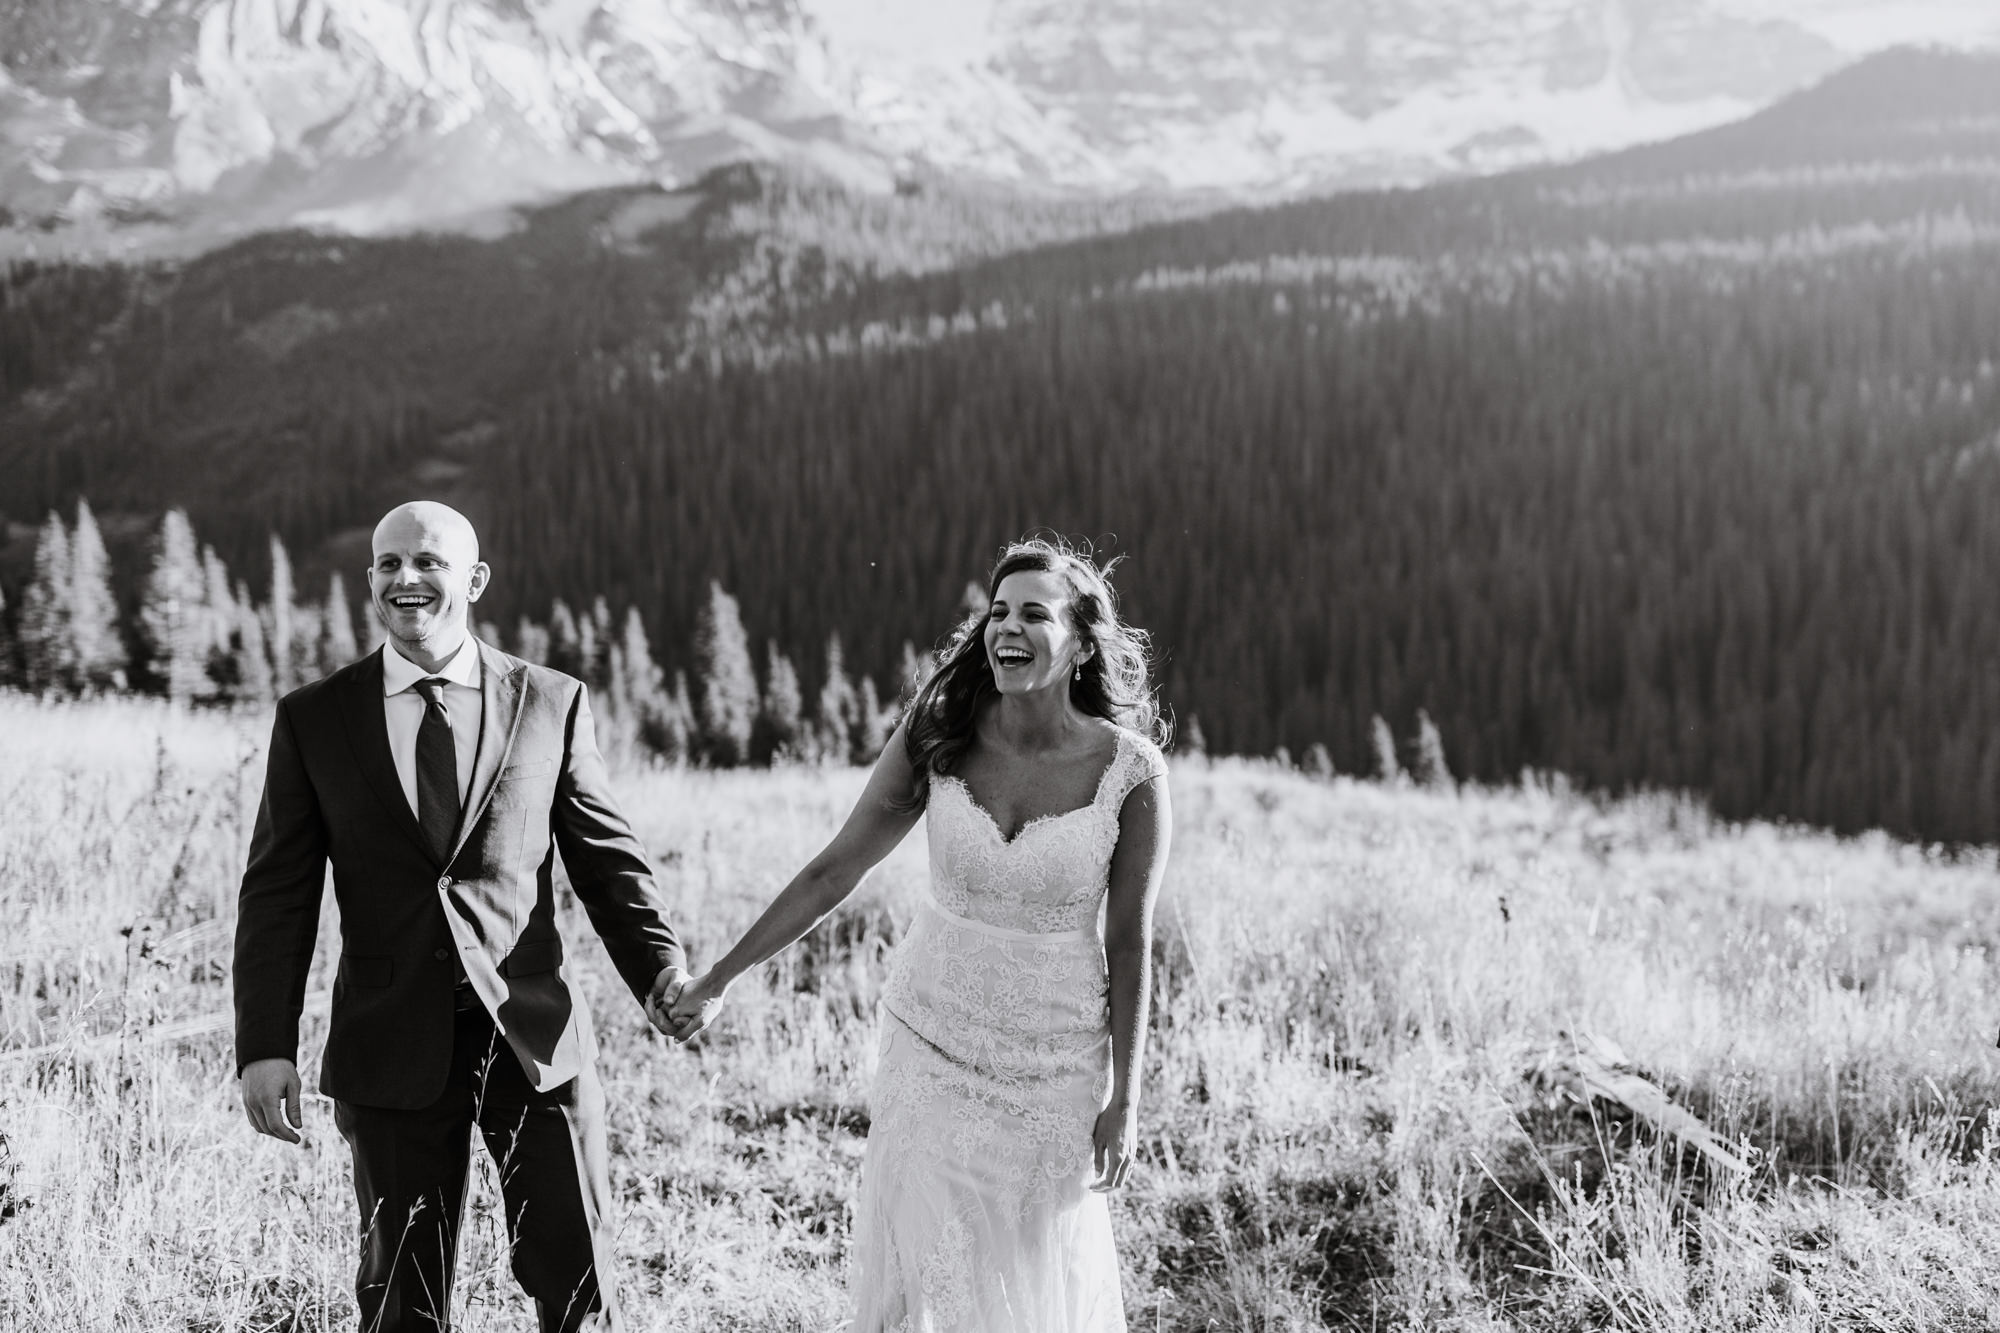 JENNY + ASHLEY'S MOUNTAINTOP INTIMATE WEDDING | TELLURIDE, COLORADO ELOPEMENT PHOTOGRAPHER | FALL MOUNTAIN WEDDING INSPIRATION | the hearnes adventure photography | www.thehearnes.com